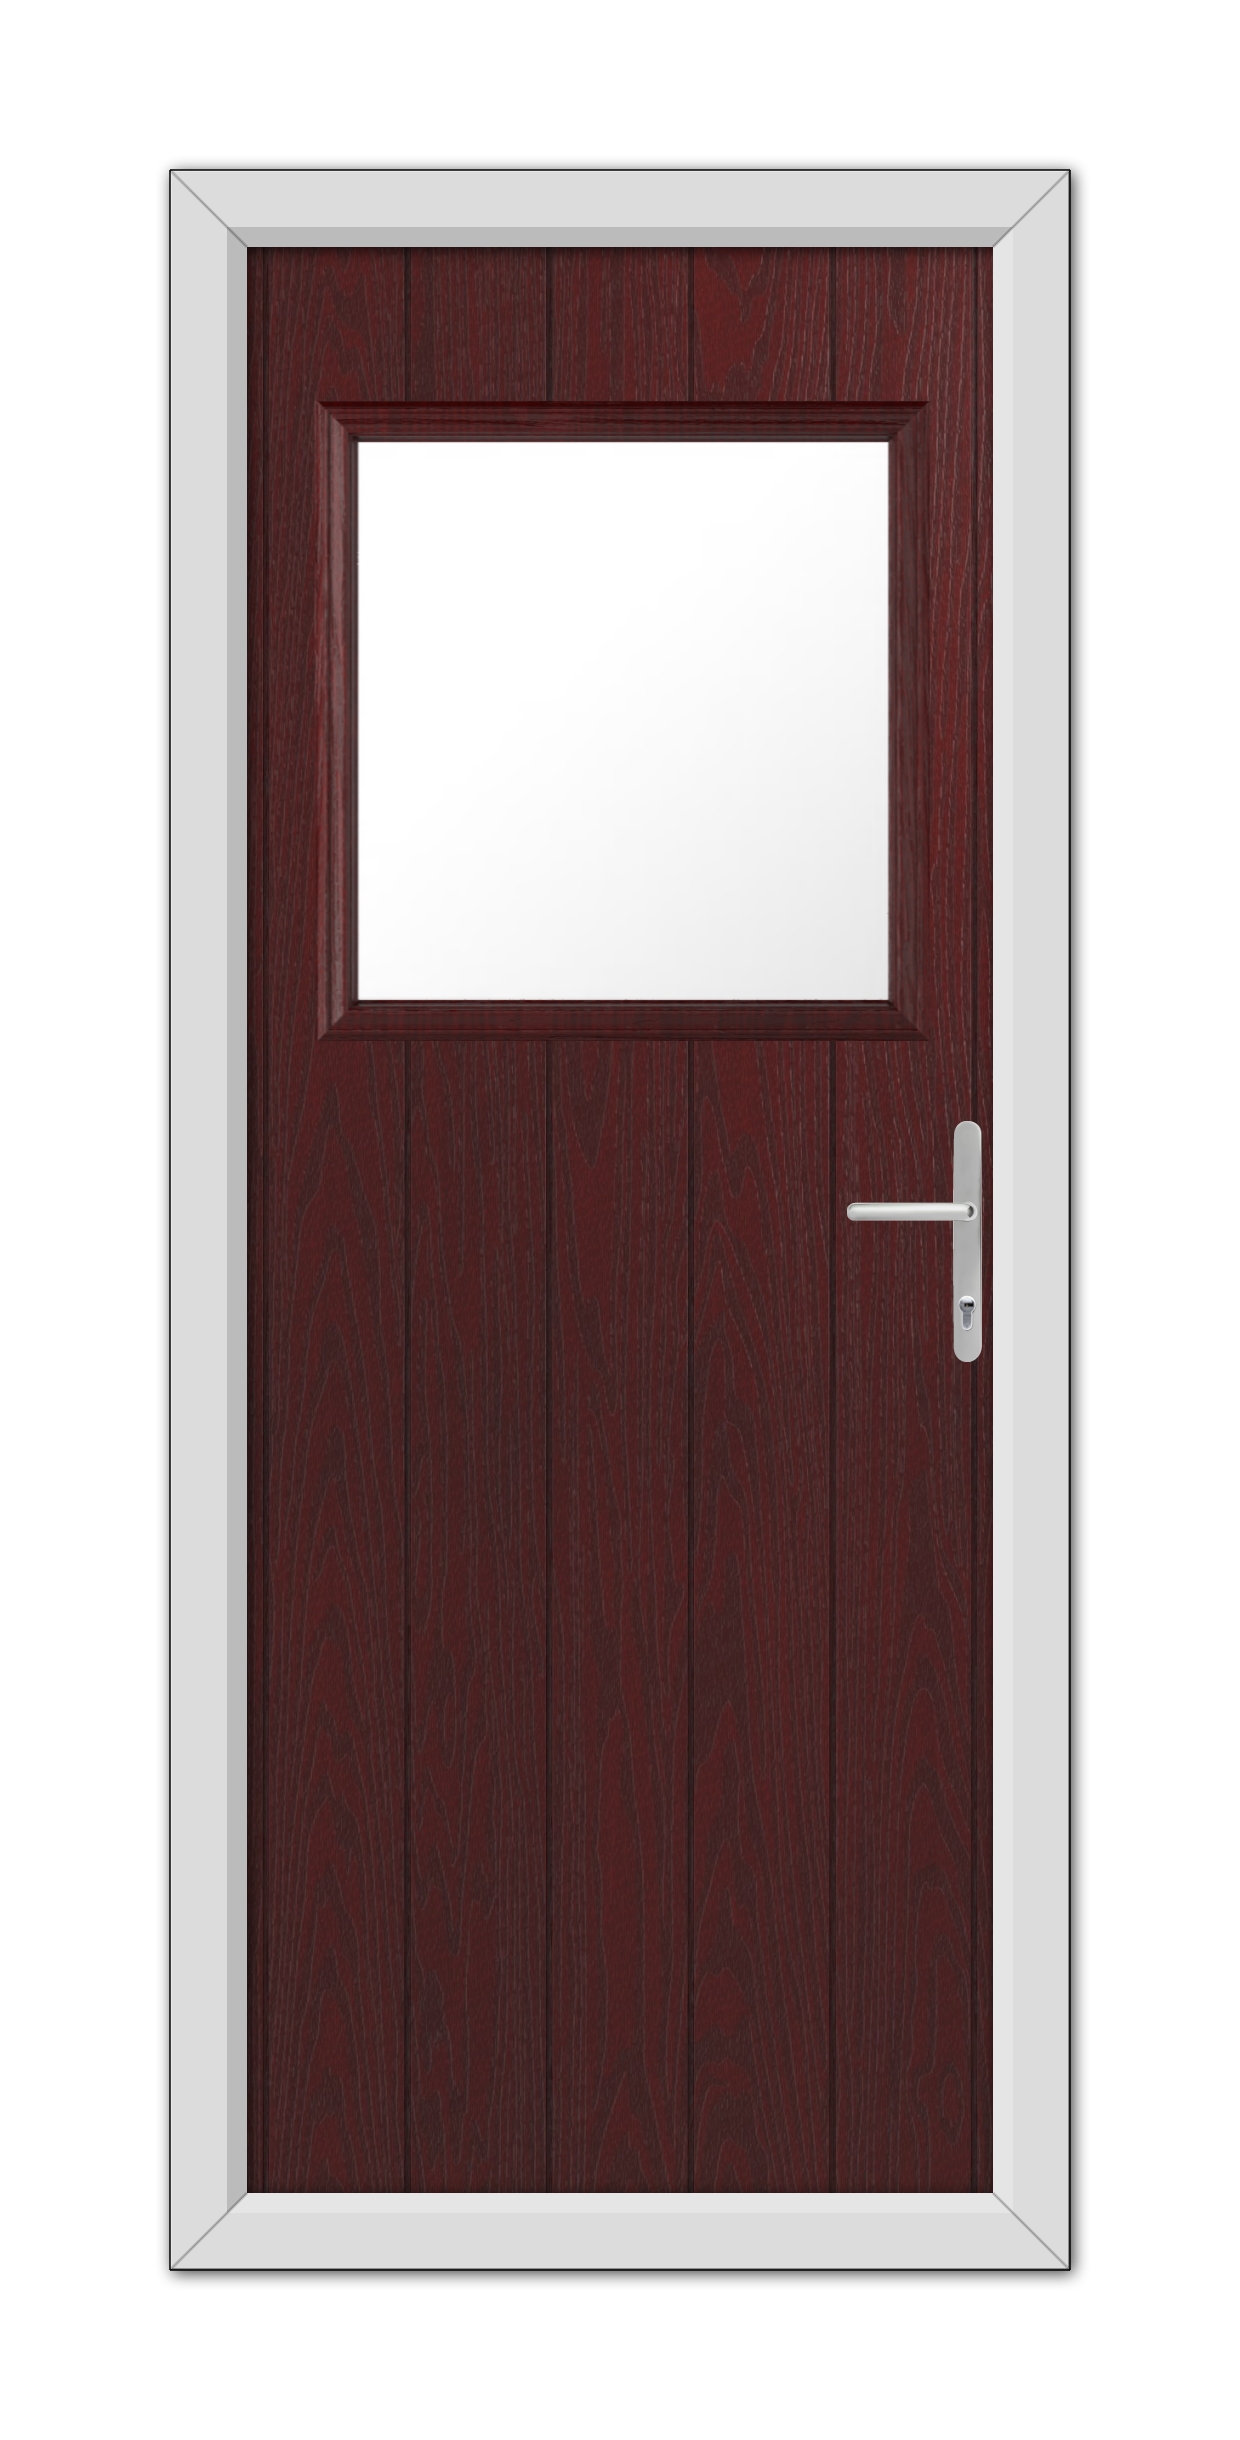 A Rosewood Fife Composite Door 48mm Timber Core with a square window and a modern metal handle, set within a white frame.